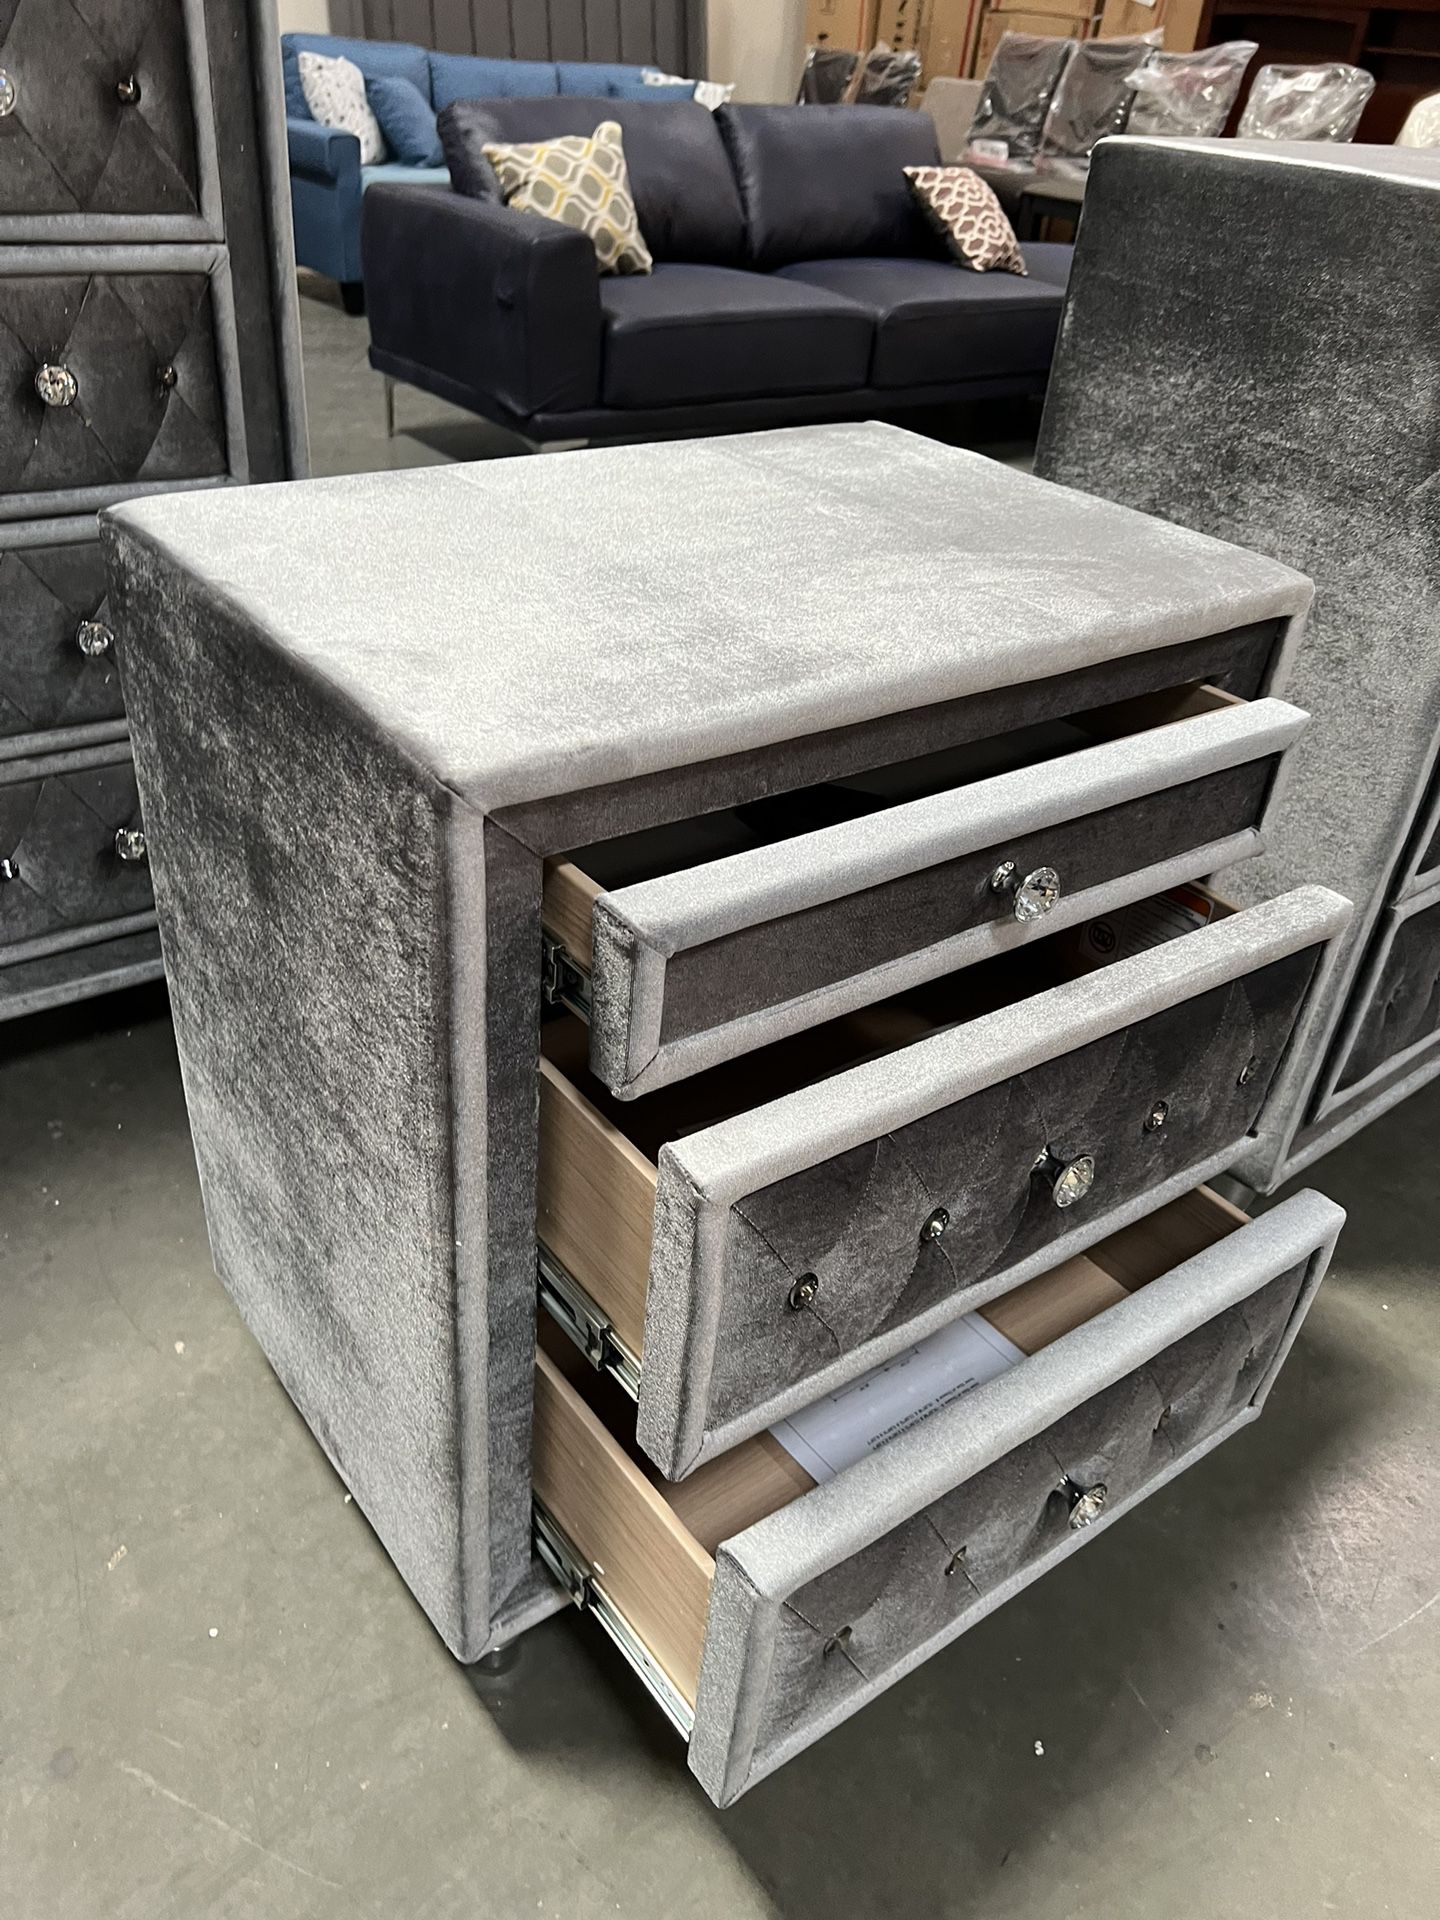 !New!!! Premium Upholstered Nightstand In Gray, Grey Nightstand, Nightstand, Nightstand With USB Charger, Jeweled Knobs Nightstand, Dovetailed Drawers